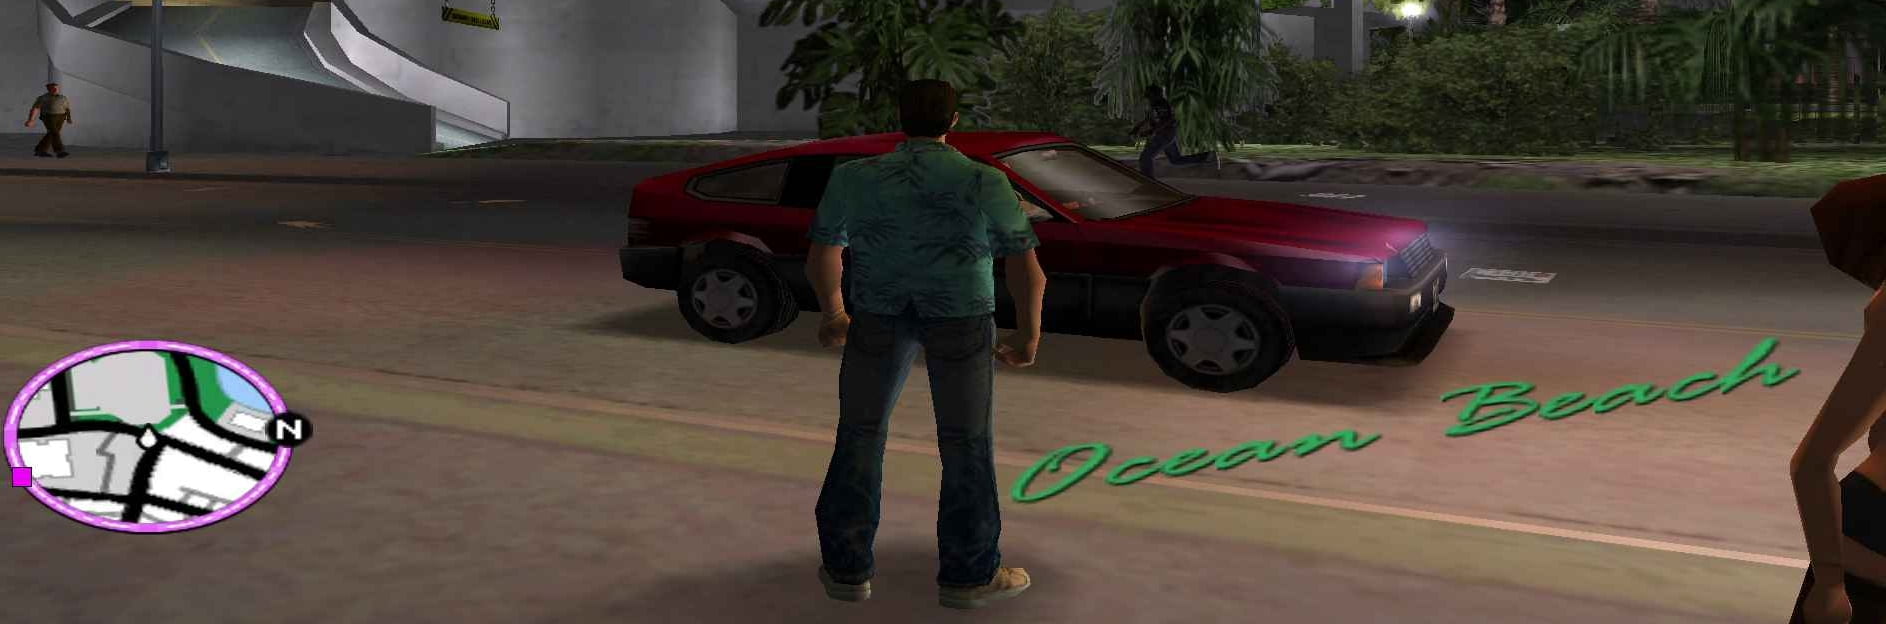 Gta vice city download highly compressed